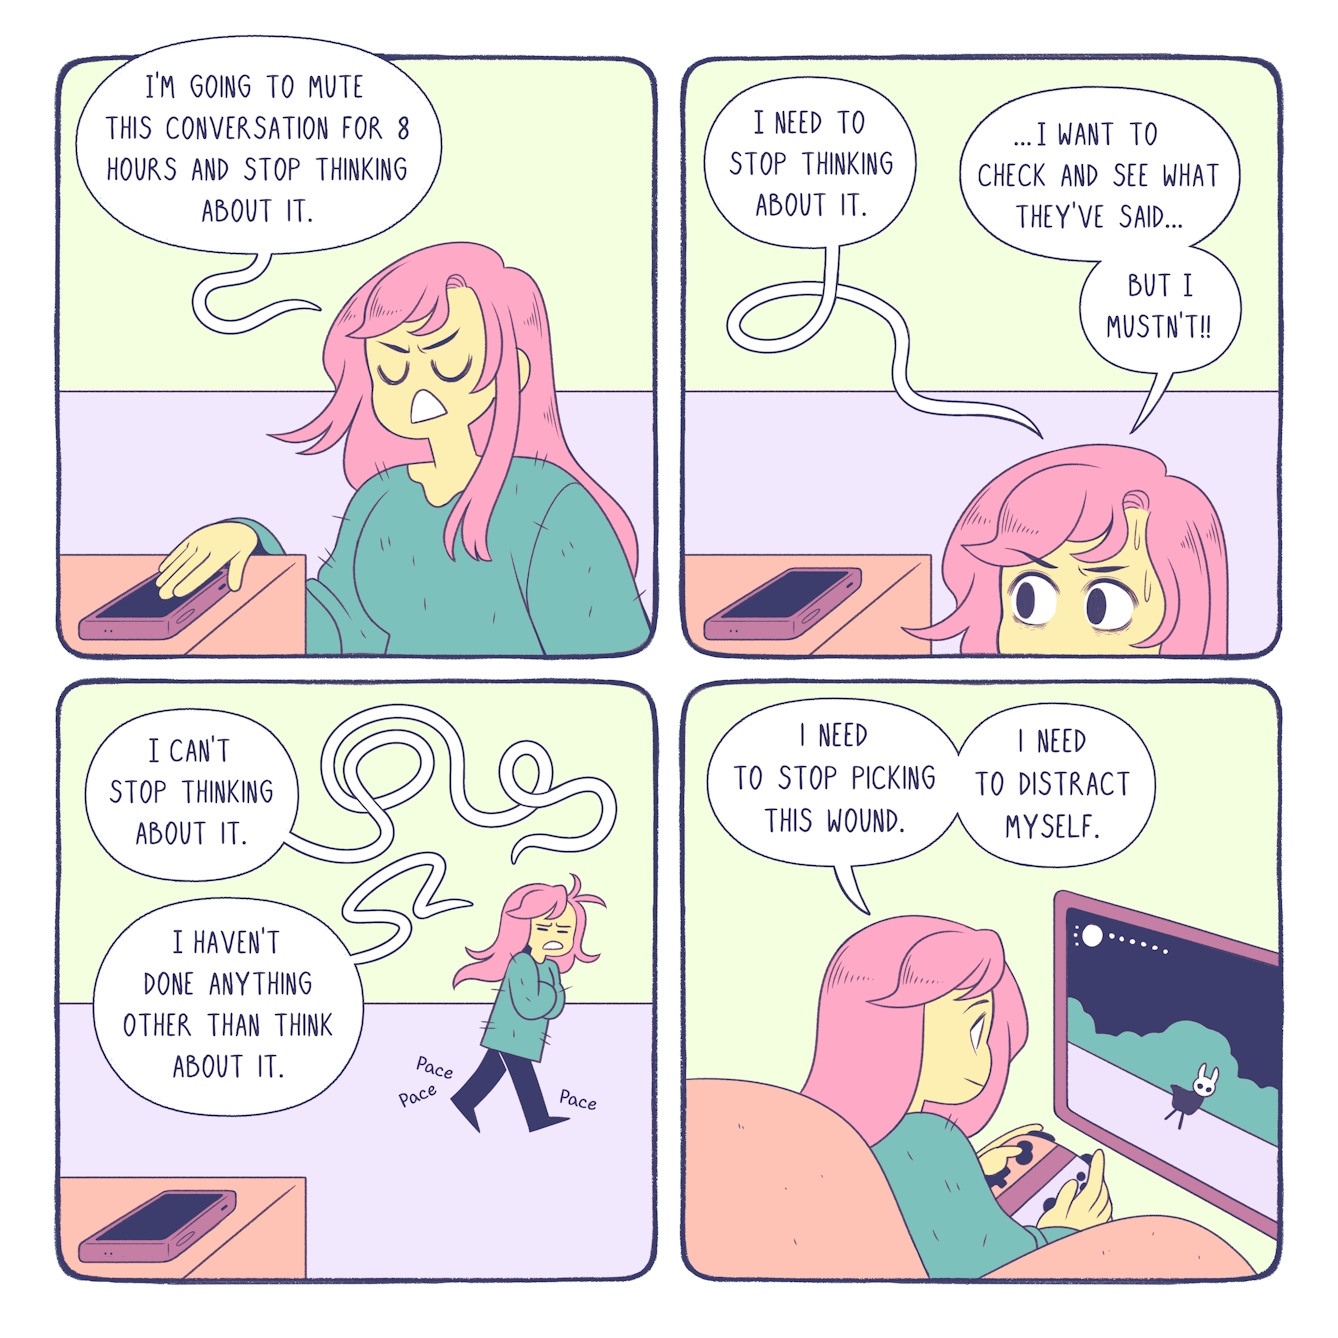 Colourful four panel comic. The same character, a girl with long pink hair and a green jumper, appears in each panel. In the first panel on the top left, the girl has her hand covering her smart phone, which is placed on a table in the foreground, and she looks frustrated. A thought bubble comes from her and reads 'I'm going to mute this conversation for 8 hours and stop thinking about it'. The second panel shows the same girl looking anxiously at her phone, her eyes wide and beads of sweat dripping down her forehead. Two thought bubbles come from her. The first reads 'I need to stop thinking about it'. The second reads '...I want tot check and see what they've said... But I mustn't!' The third panel shows the girl pacing around a room in a distressed manner, her arms are crossed and her teeth are gritted. The smartphone remains in the foreground on a table. Thought bubbles from her read 'I cant stop thinking about it' and 'I haven't done anything other than think about it'. The fourth panel shows the girl sat in an armchair playing on a video game console. She looks peaceful and focused. She is holding the controller and on the screen is an animal avatar. A thought bubble from her reads 'I need to stop picking this wound. I need to distract myself'. 